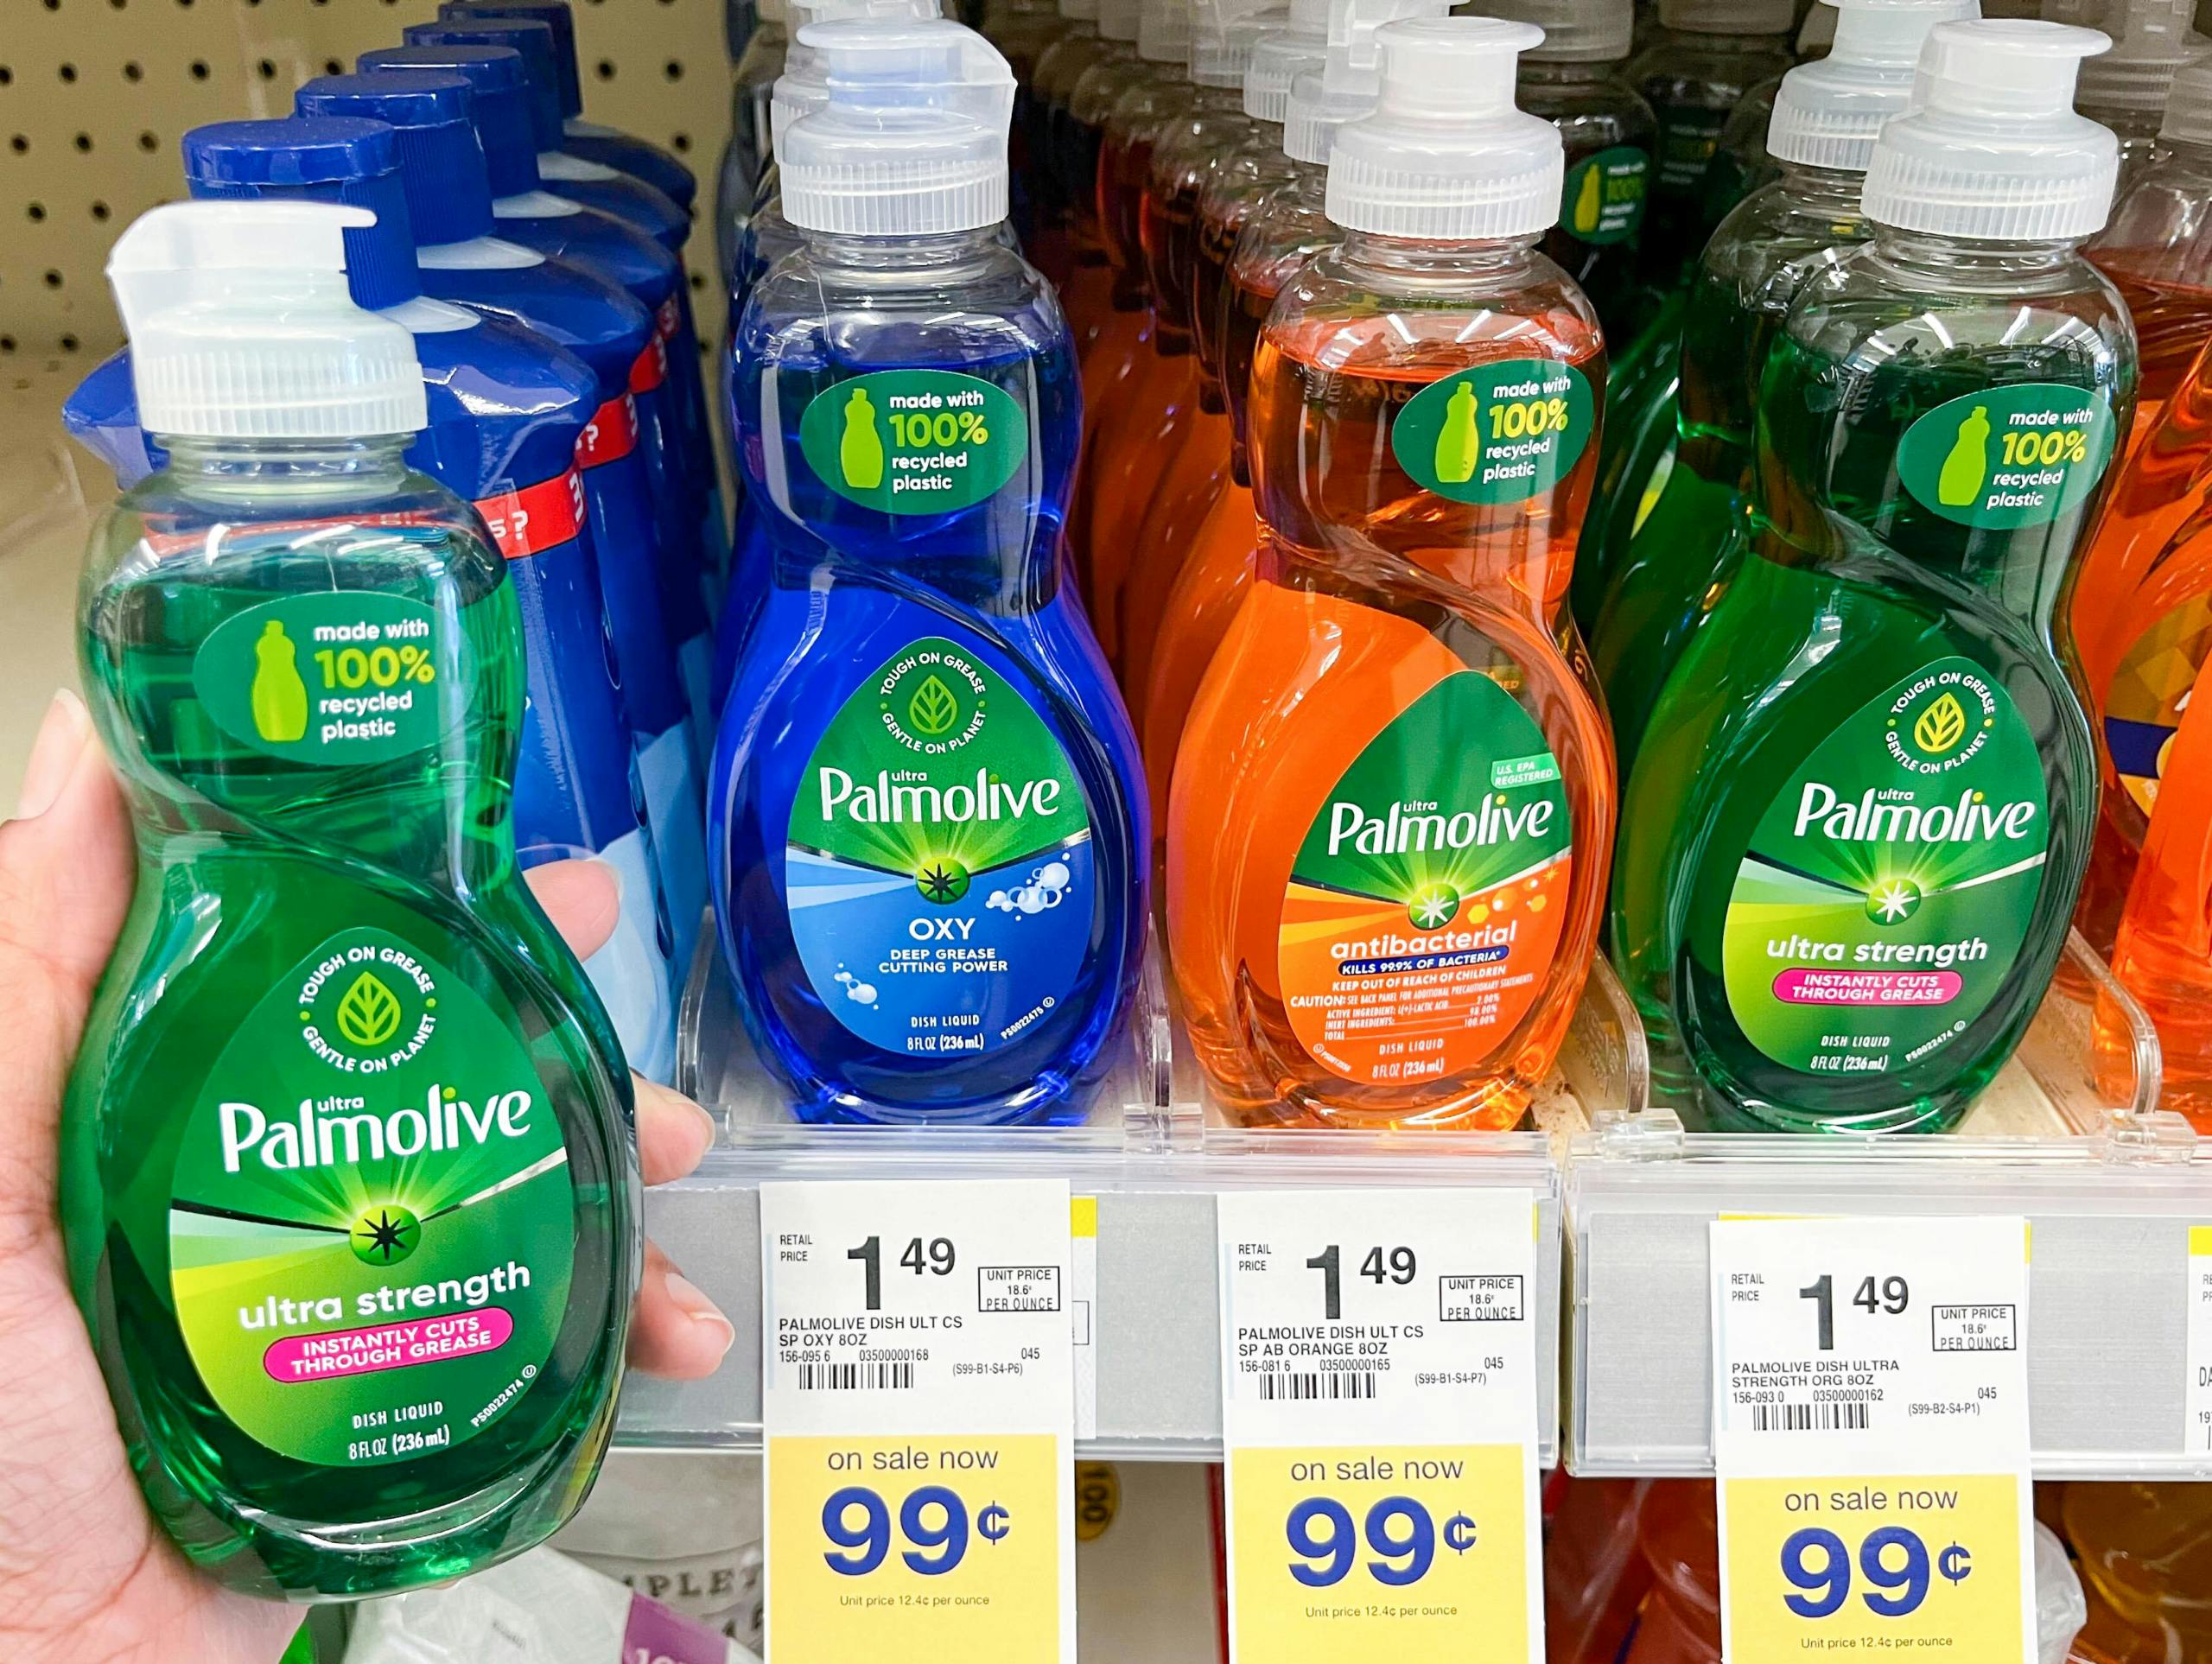 A person's hand holding a bottle of Palmolive Ultra Strength liquid dish soap next to a shelf of different variations of Palmolive liquid dish soap at Walgreens.